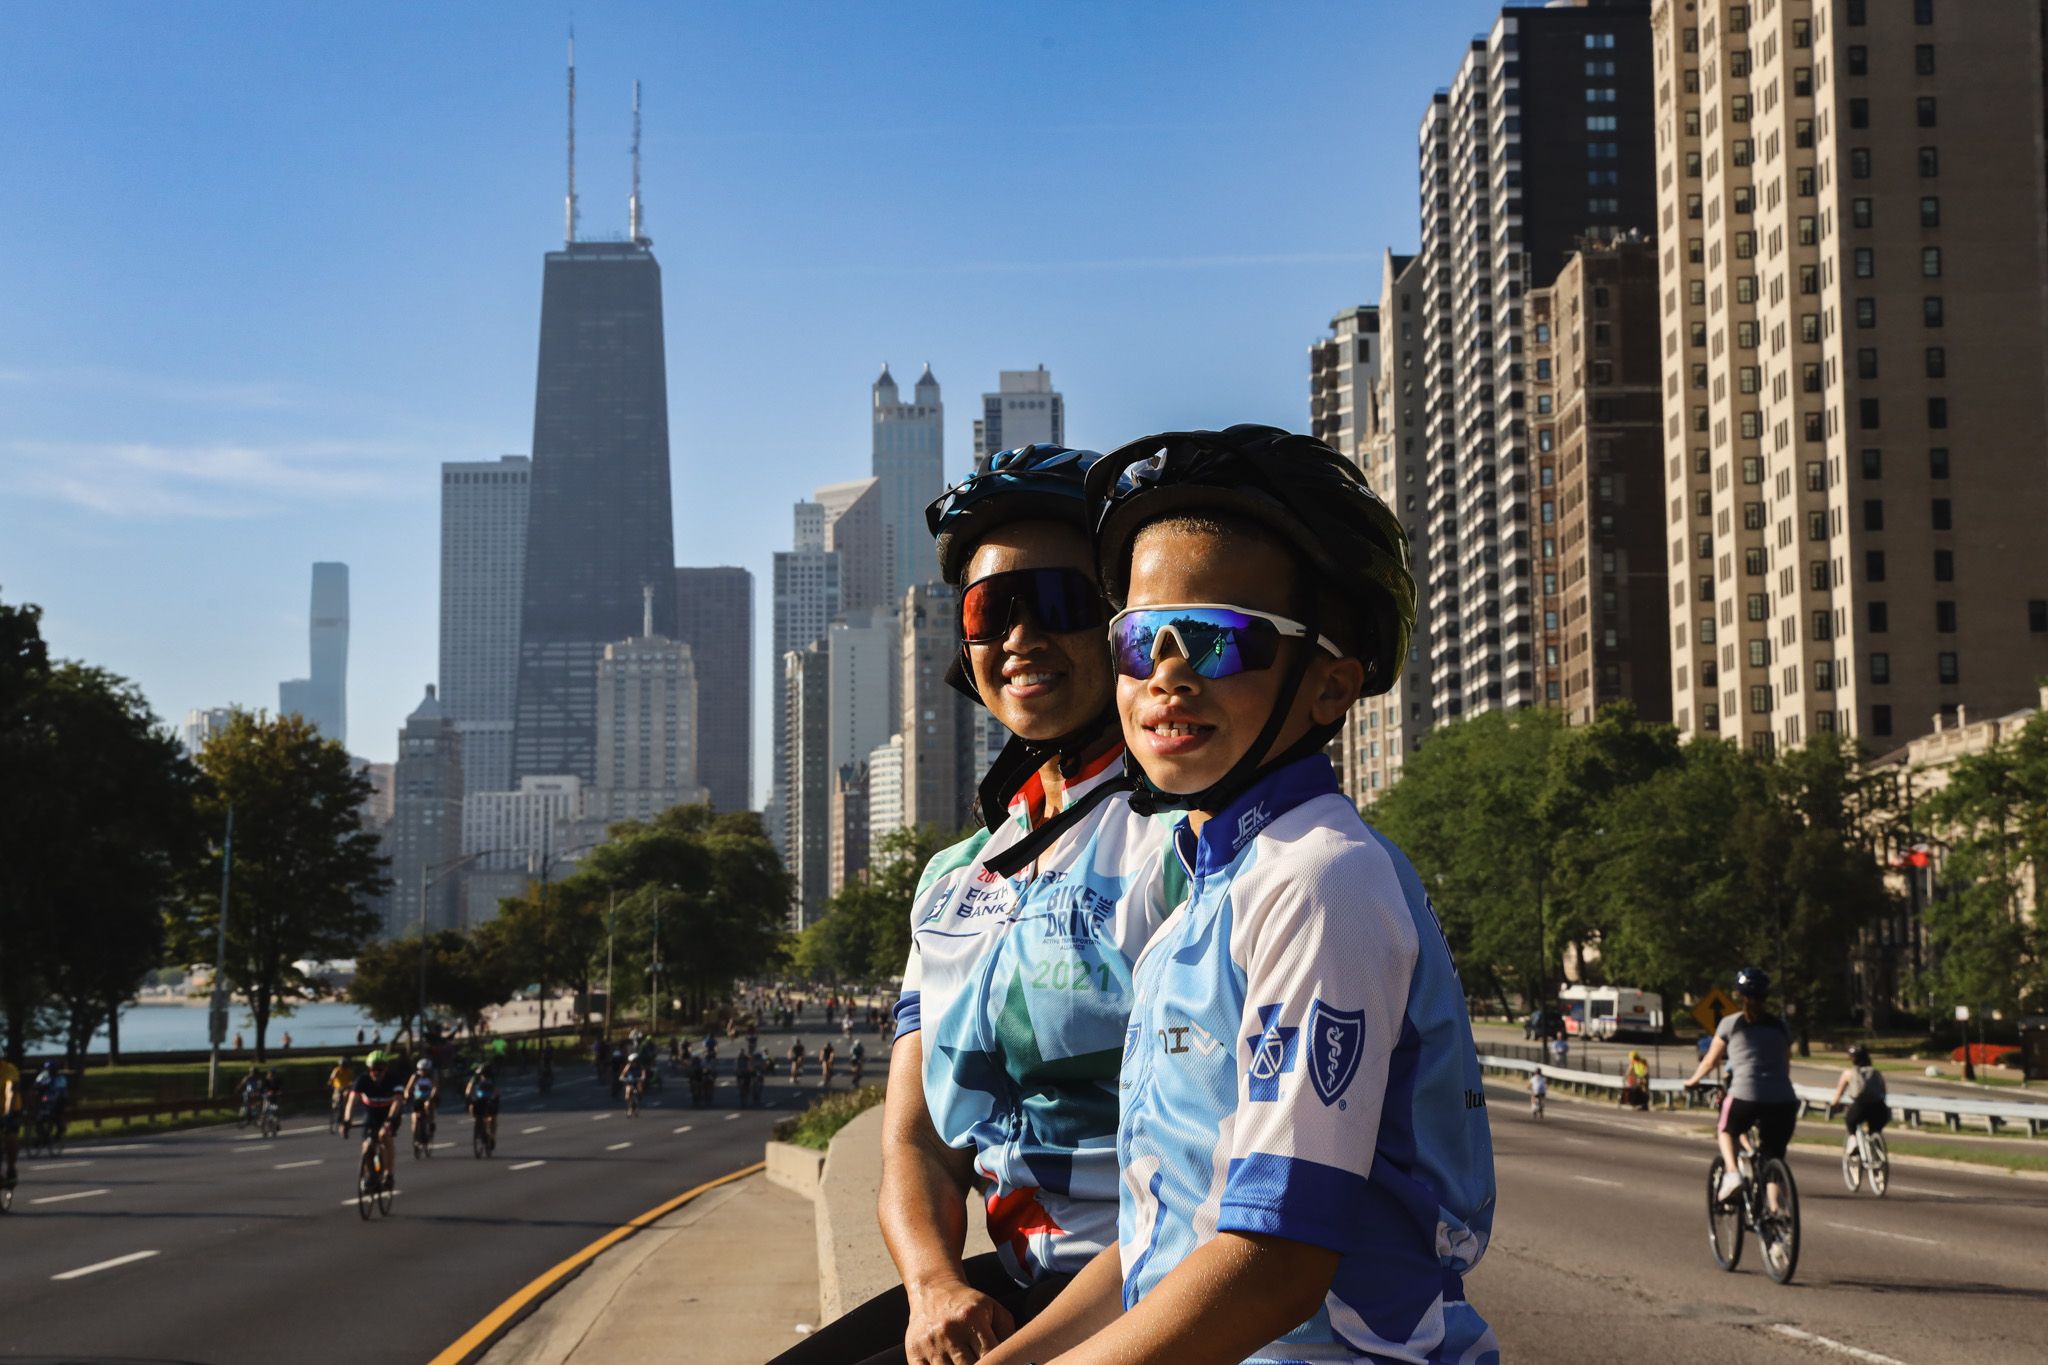 A mother and child wearing helmets and glasses pose with the Chicago skyline in the background